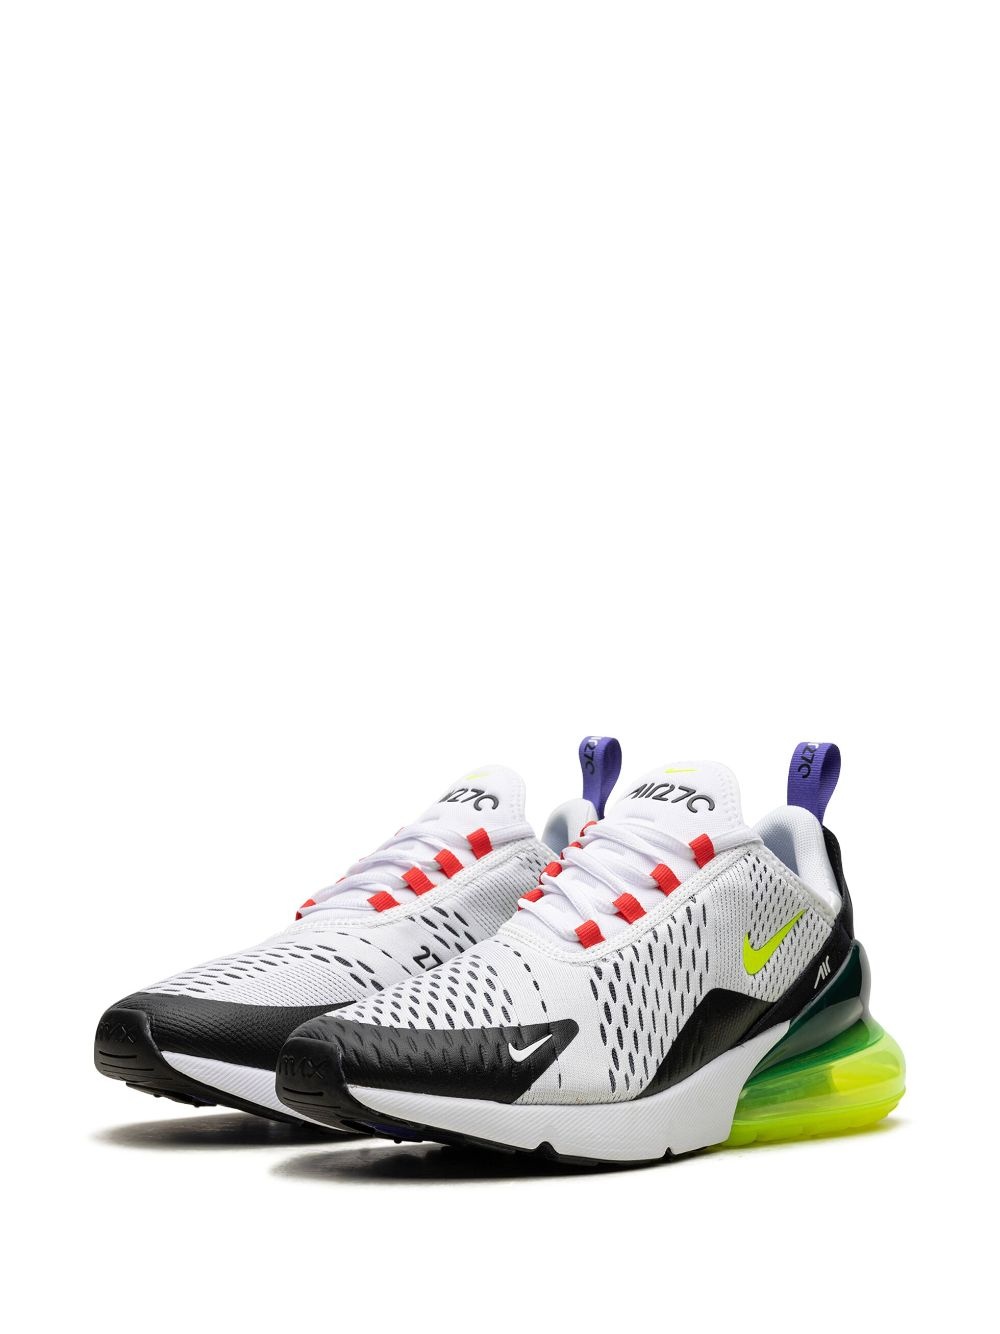 Air Max 270 "White/Volt/Siren Red" sneakers - 5